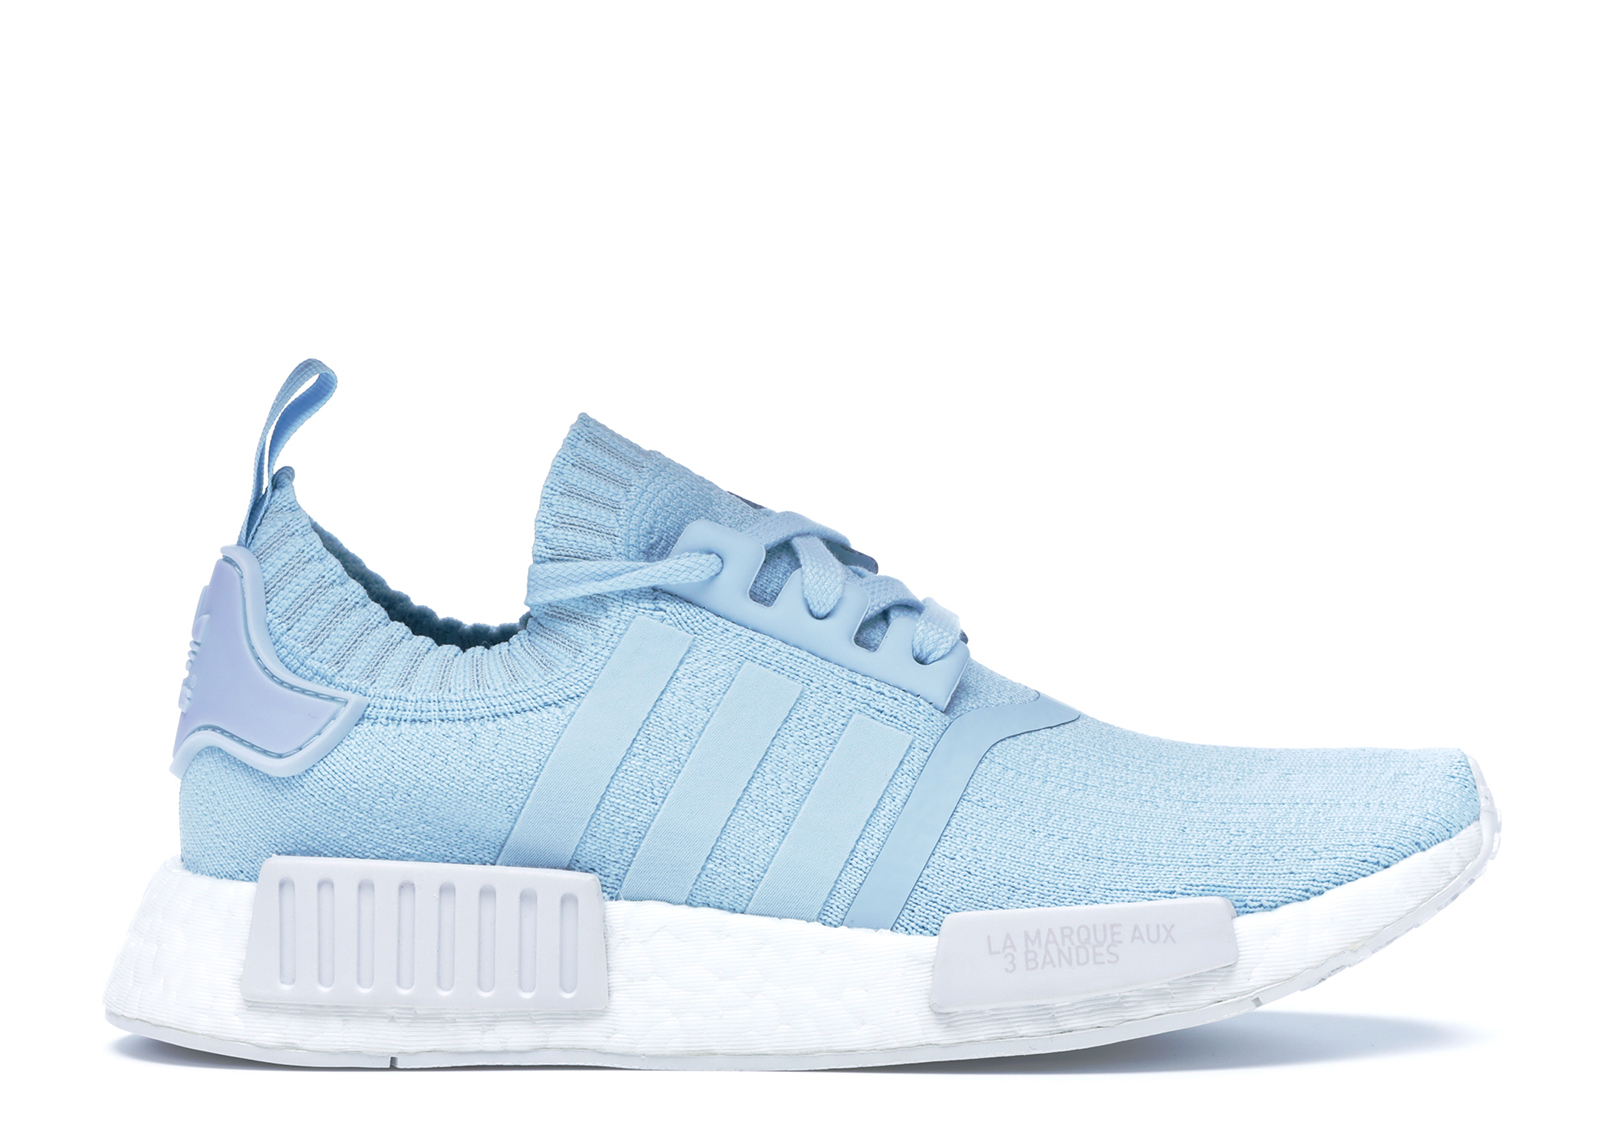 white and blue nmds women's